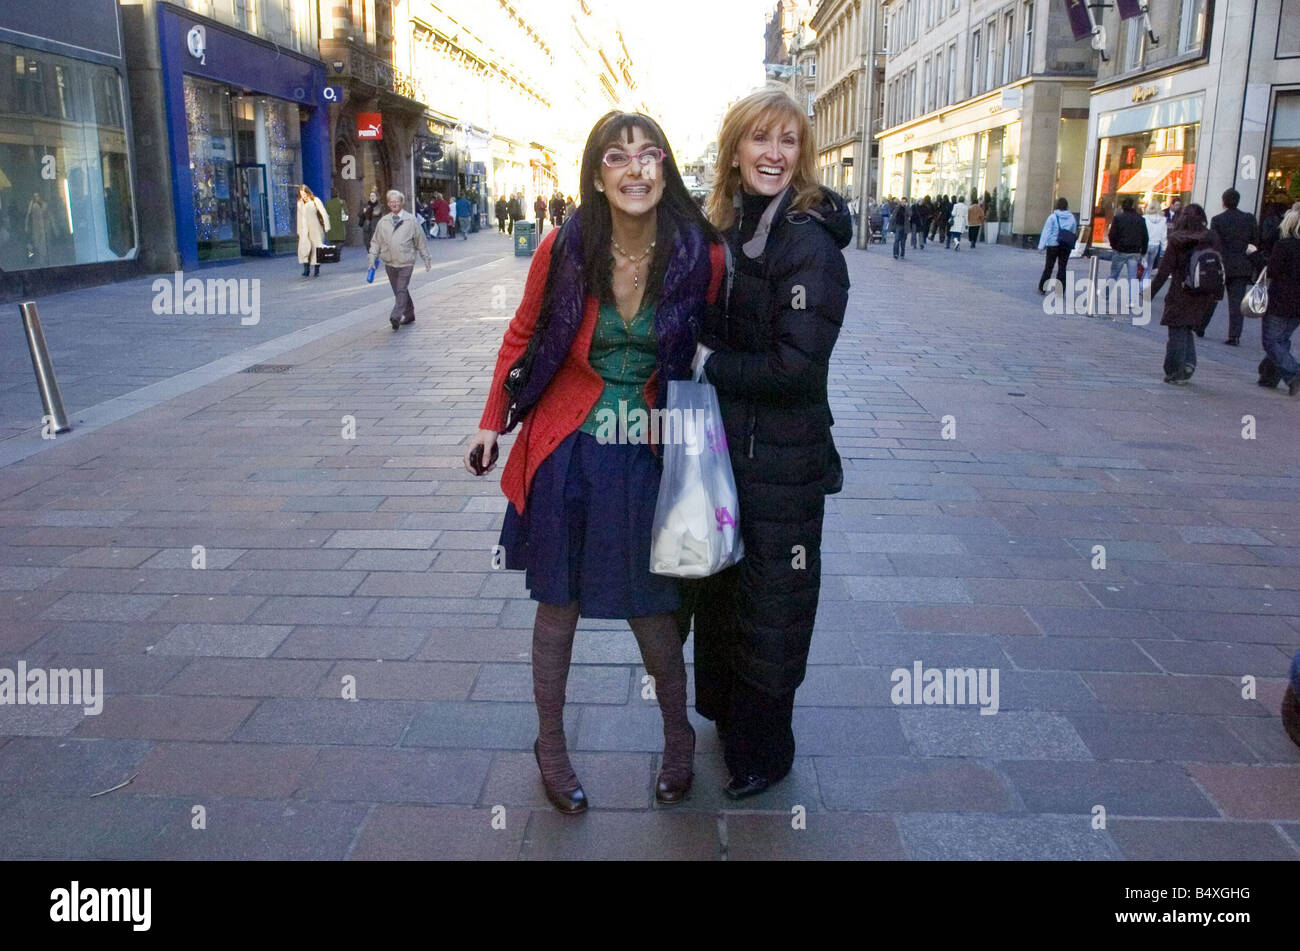 Model Julie Hannah dressed as Ugly Betty January 2007 meets Jackie Bird while shopping Stock Photo